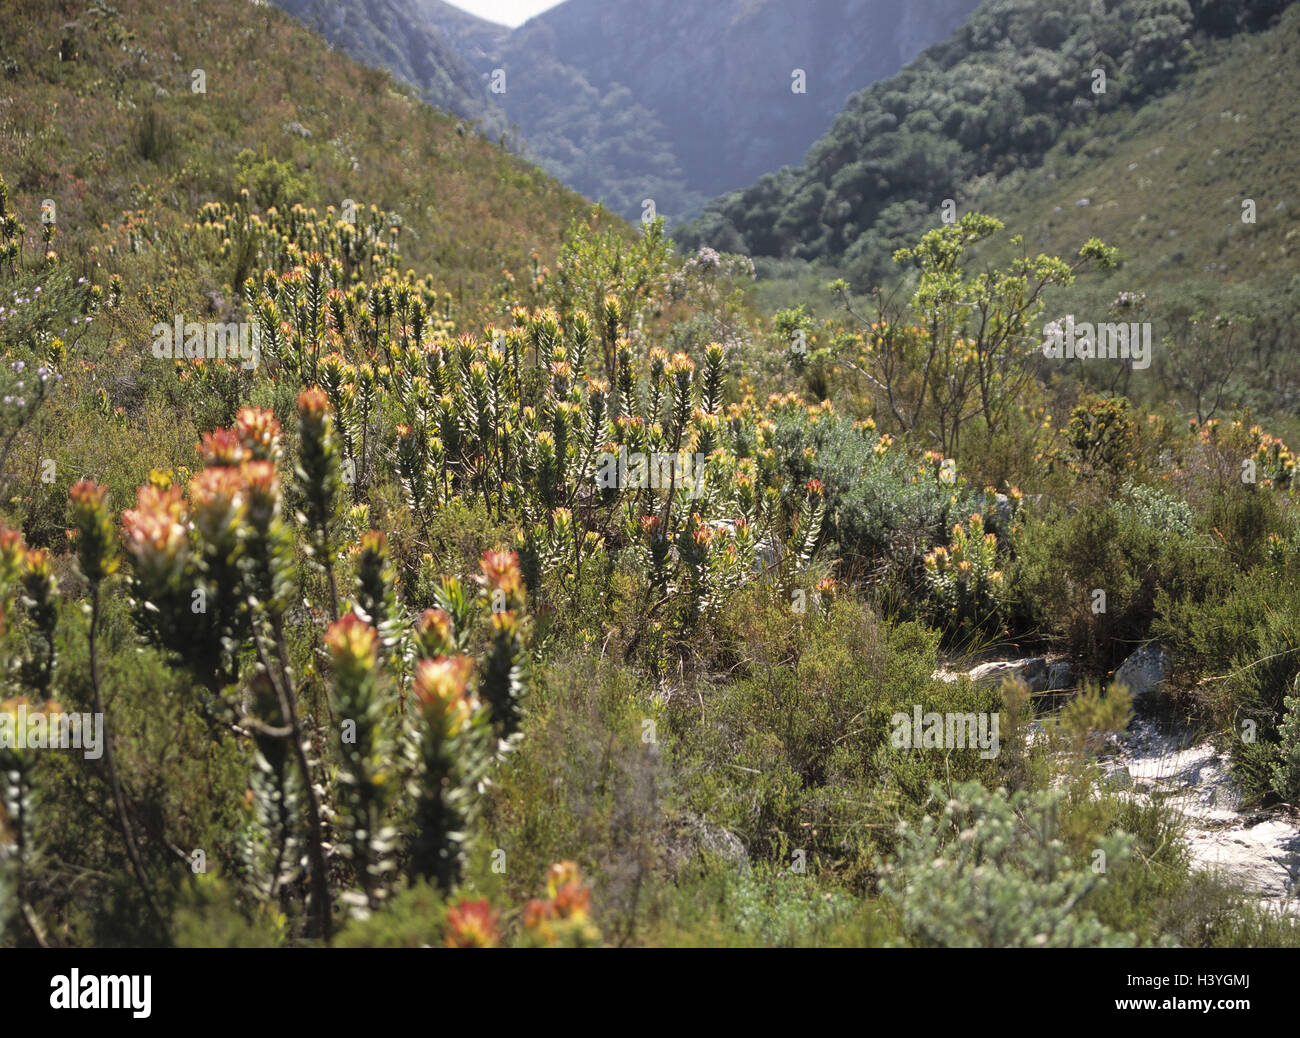 South, Africa, west cape, Betty's Bay, Harold Porter National Botanical Garden, footpath, vegetation, mountain landscape, Africa, South, Africa, province western cape, the Cape Province, travelling route, travelling path, Trail, plants, Fynbos, Proteas, M Stock Photo